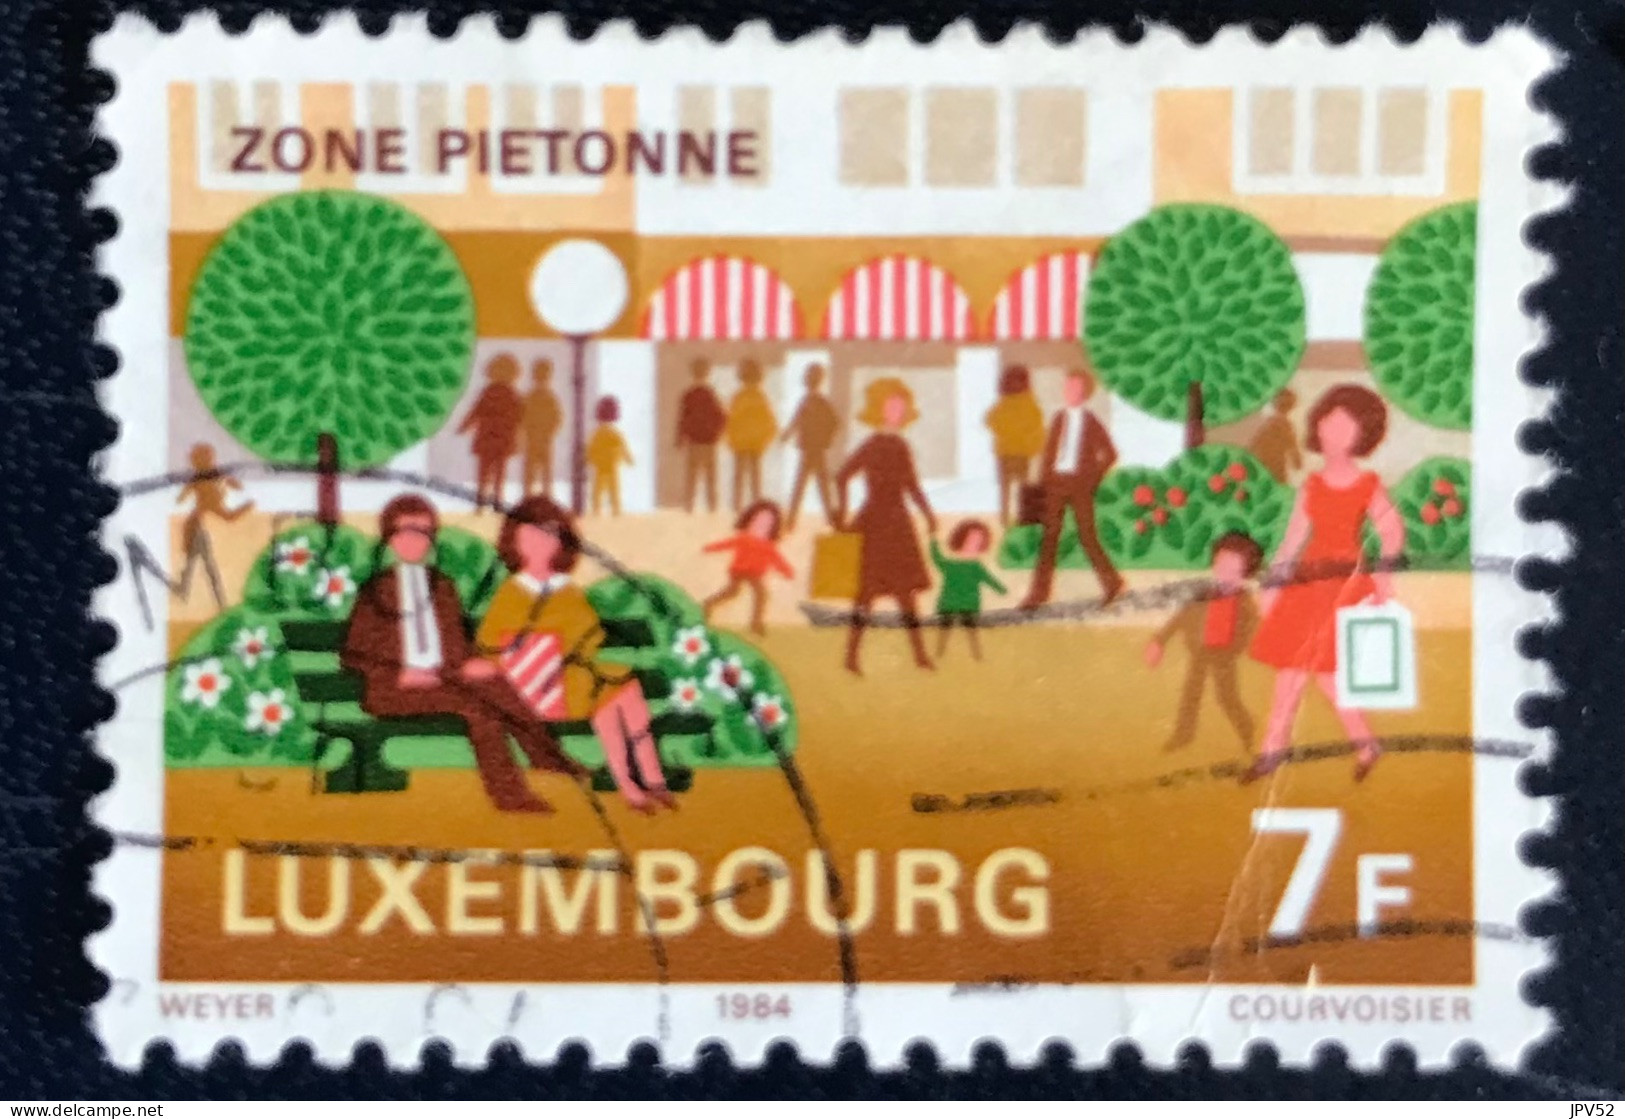 Luxembourg - Luxemburg - C18/34 - 1984 - (°)used - Michel 1095 - Milieubescherming - Used Stamps